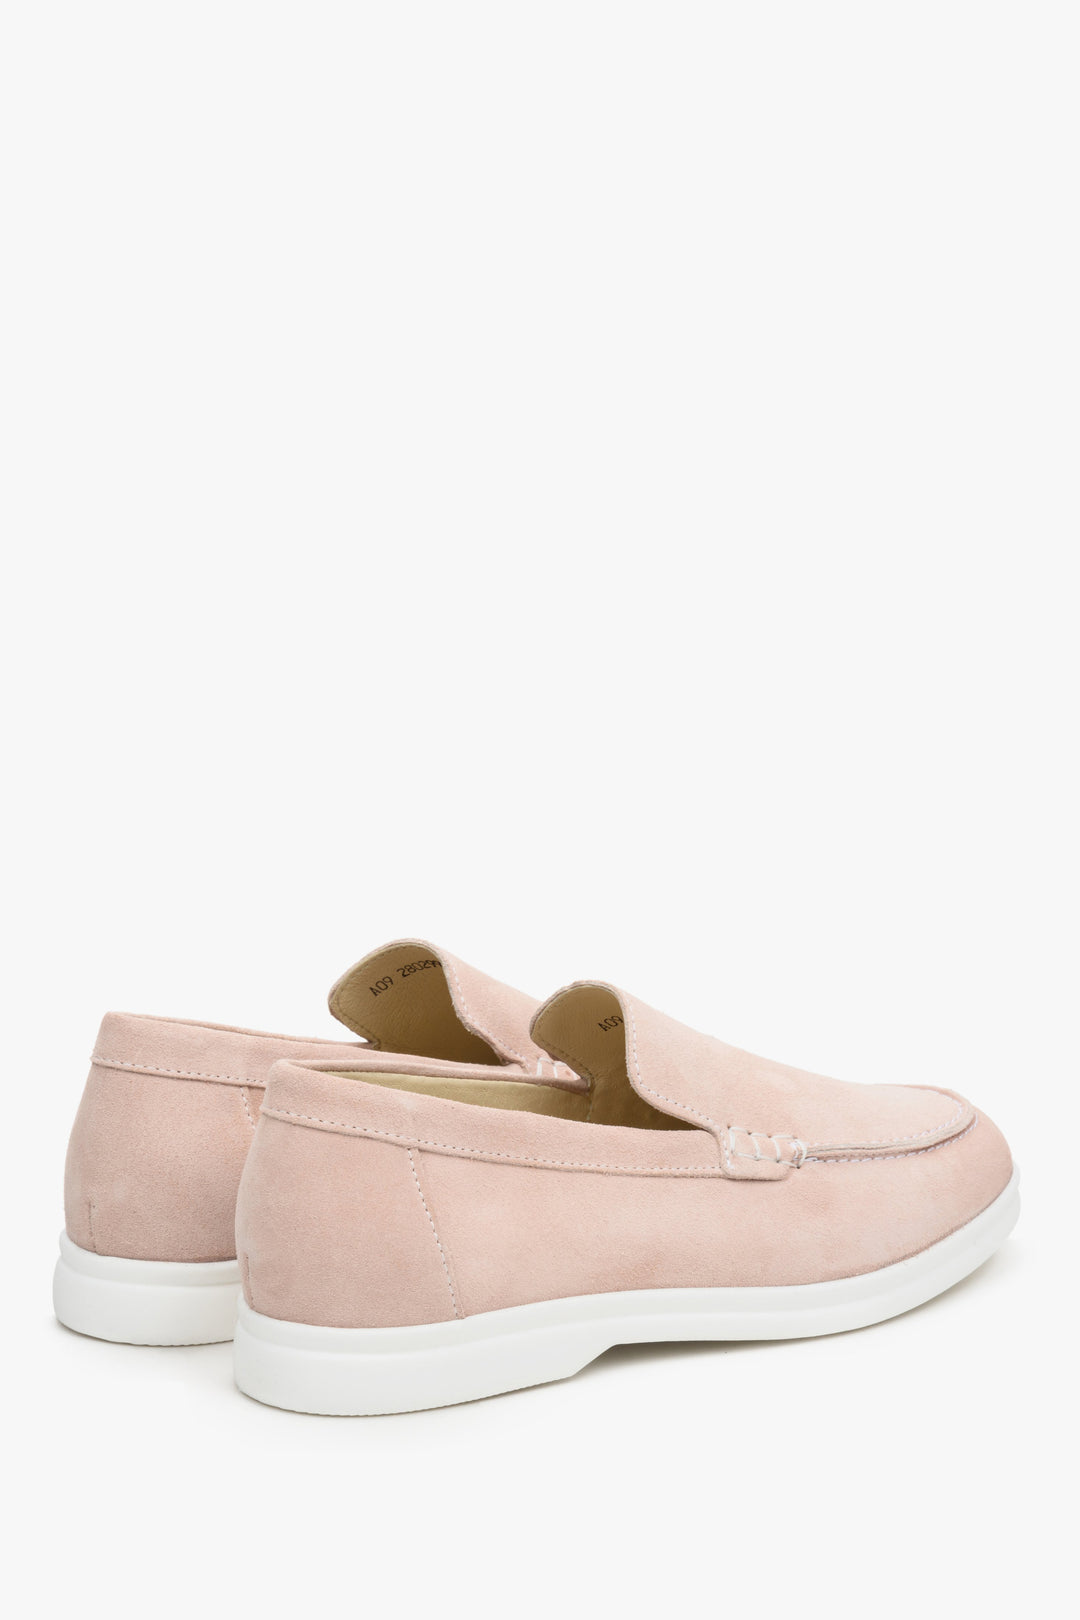 Women's suede moccasins in light pink Estro - close-up of the heel and side seam of the shoes.